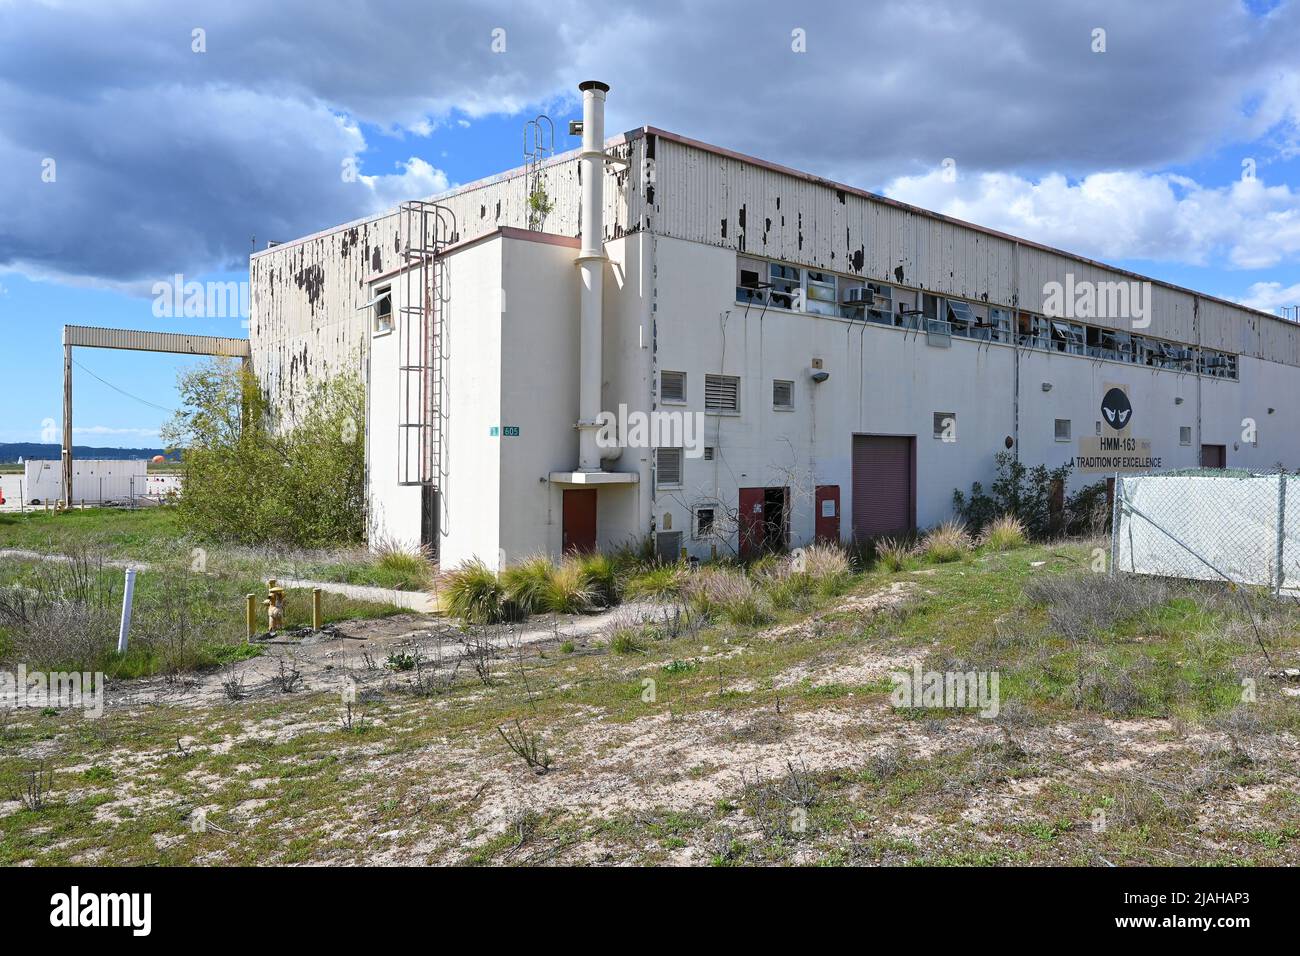 IRVINE, CALIFORNIA - 23 FEB 2022: HMM-163 Building on the Former USMC Air Station El Toro, now part of the Great Park and slated for demolition. Stock Photo